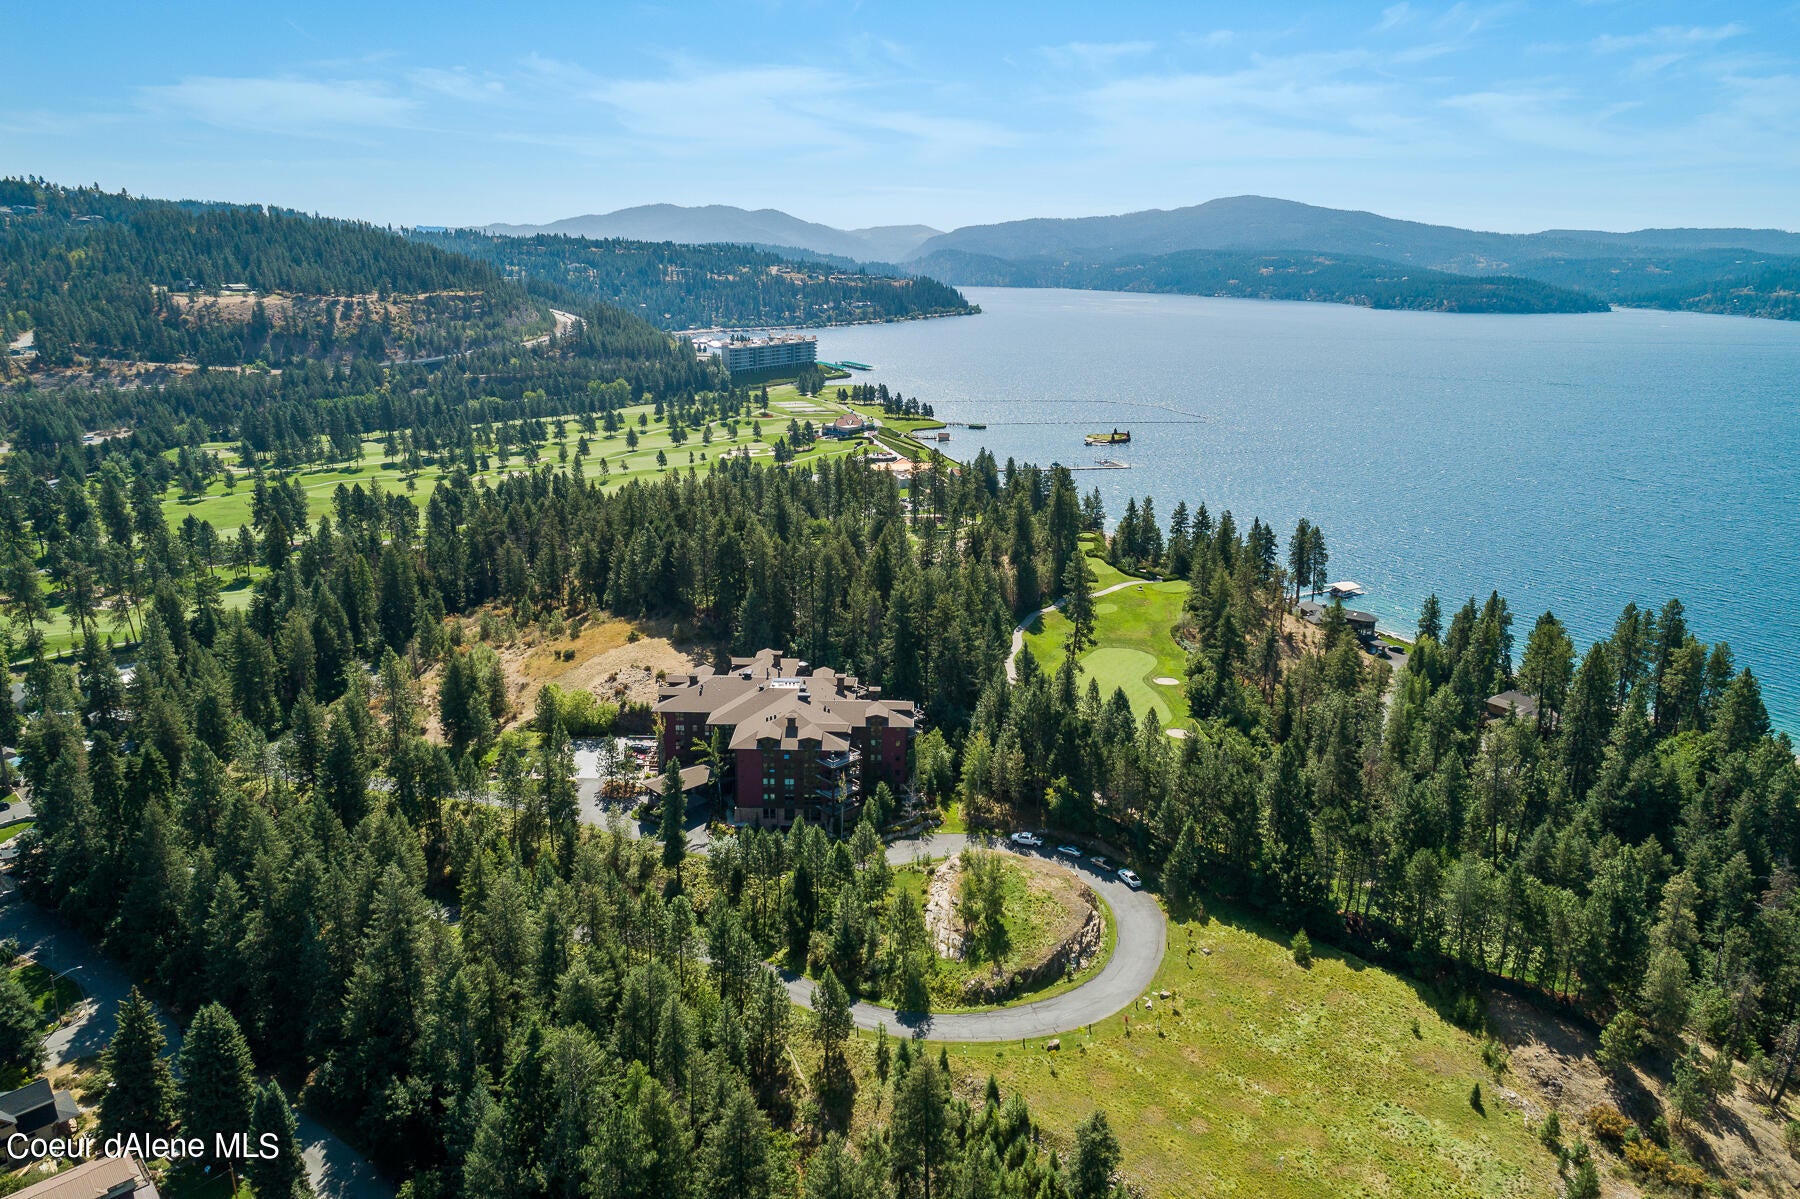 1700 E Tower Pointe Drive #102, Coeur d'Alene, Idaho, 83814, United States, 3 Bedrooms Bedrooms, ,2 BathroomsBathrooms,Residential,For Sale,1700 E Tower Pointe Drive #102,1478989